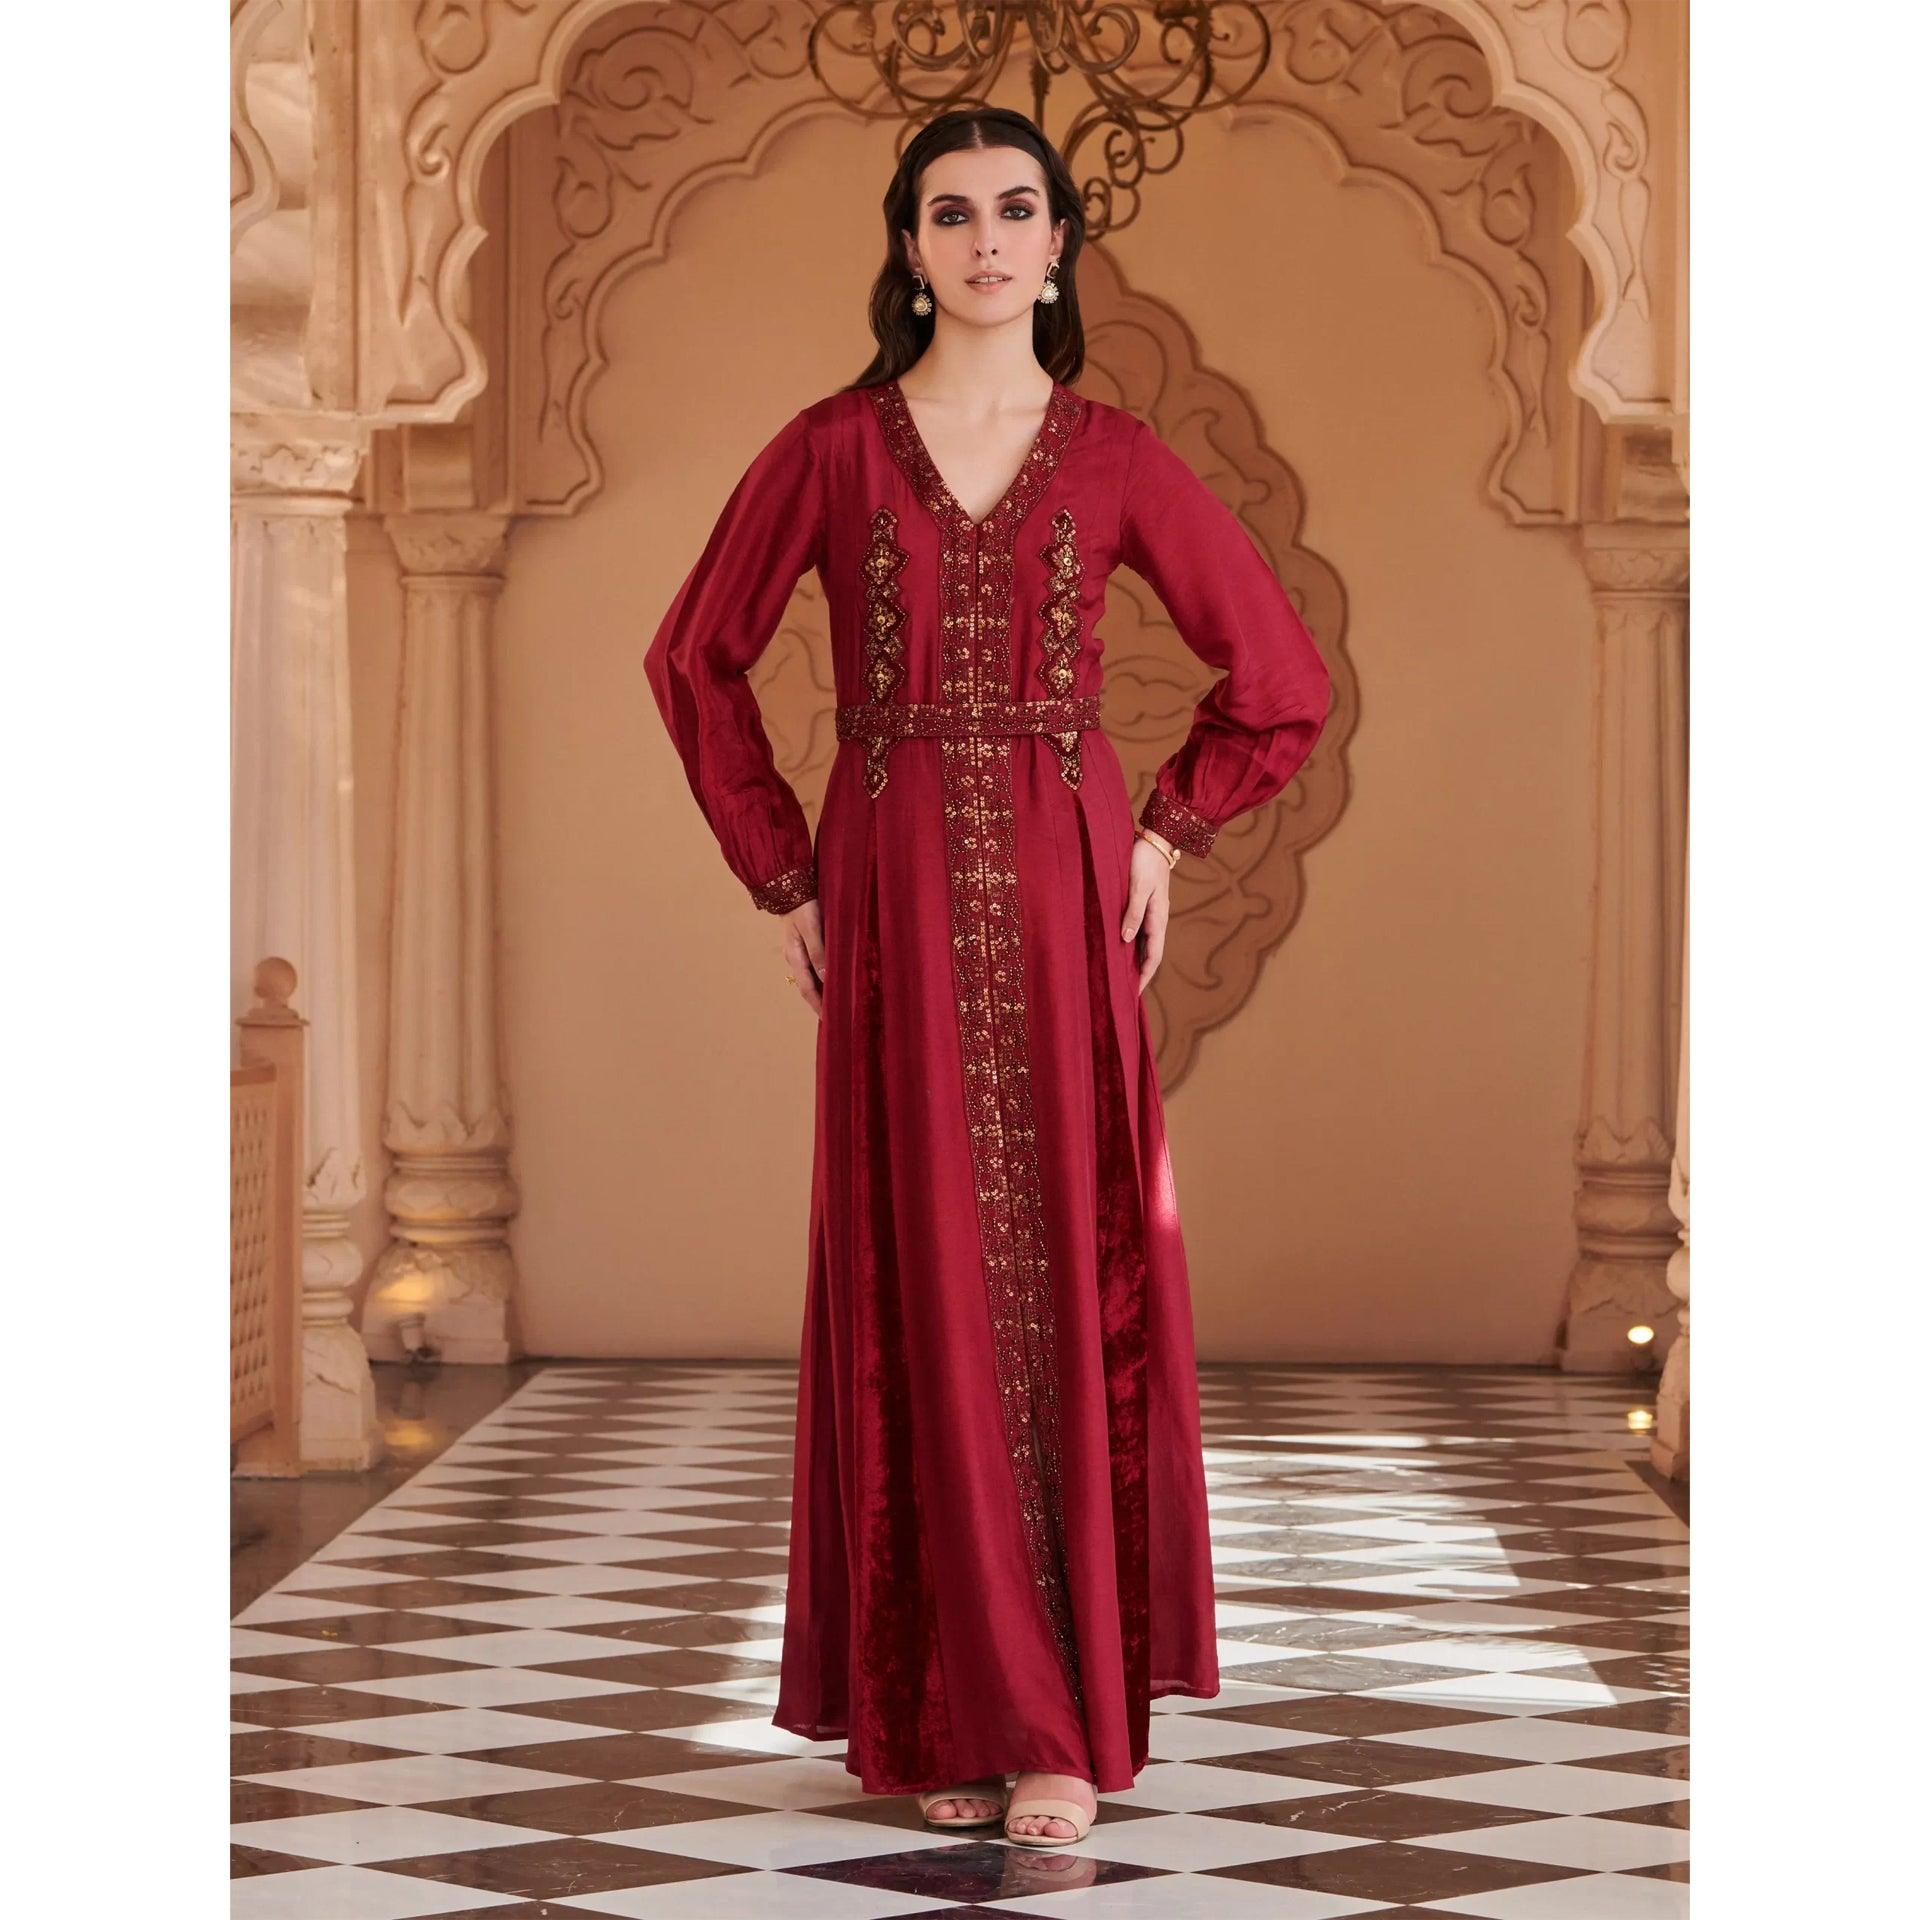 Burgundy Carmit Dress with Long Sleeves and Gold Embroidery From Shalky - WECRE8